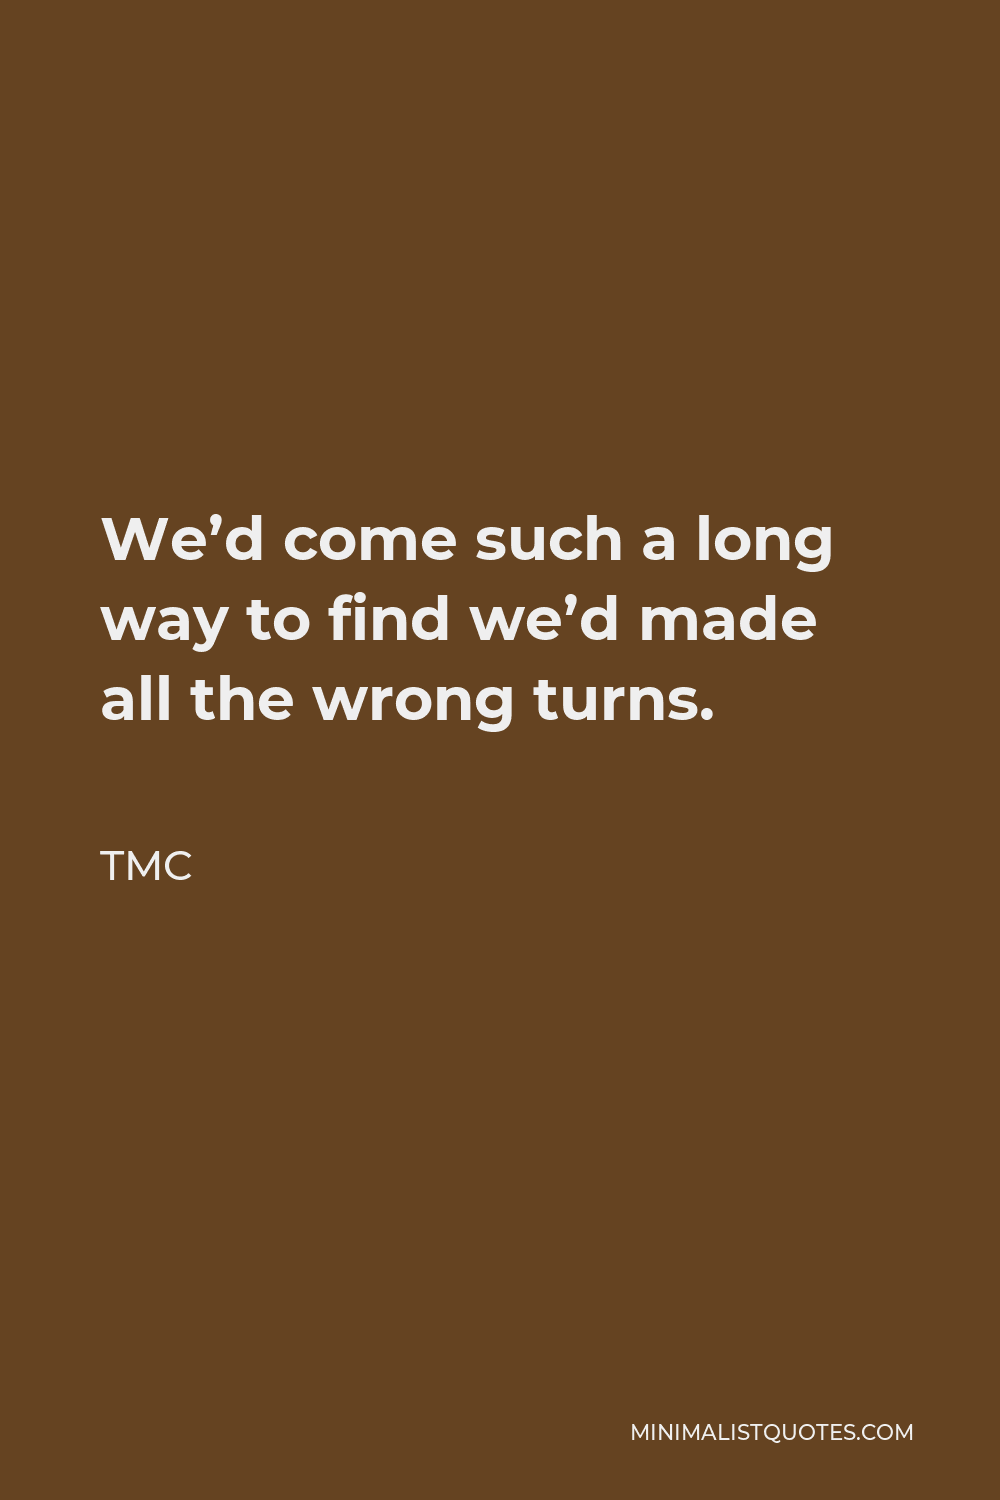 TMC Quote - We’d come such a long way to find we’d made all the wrong turns.